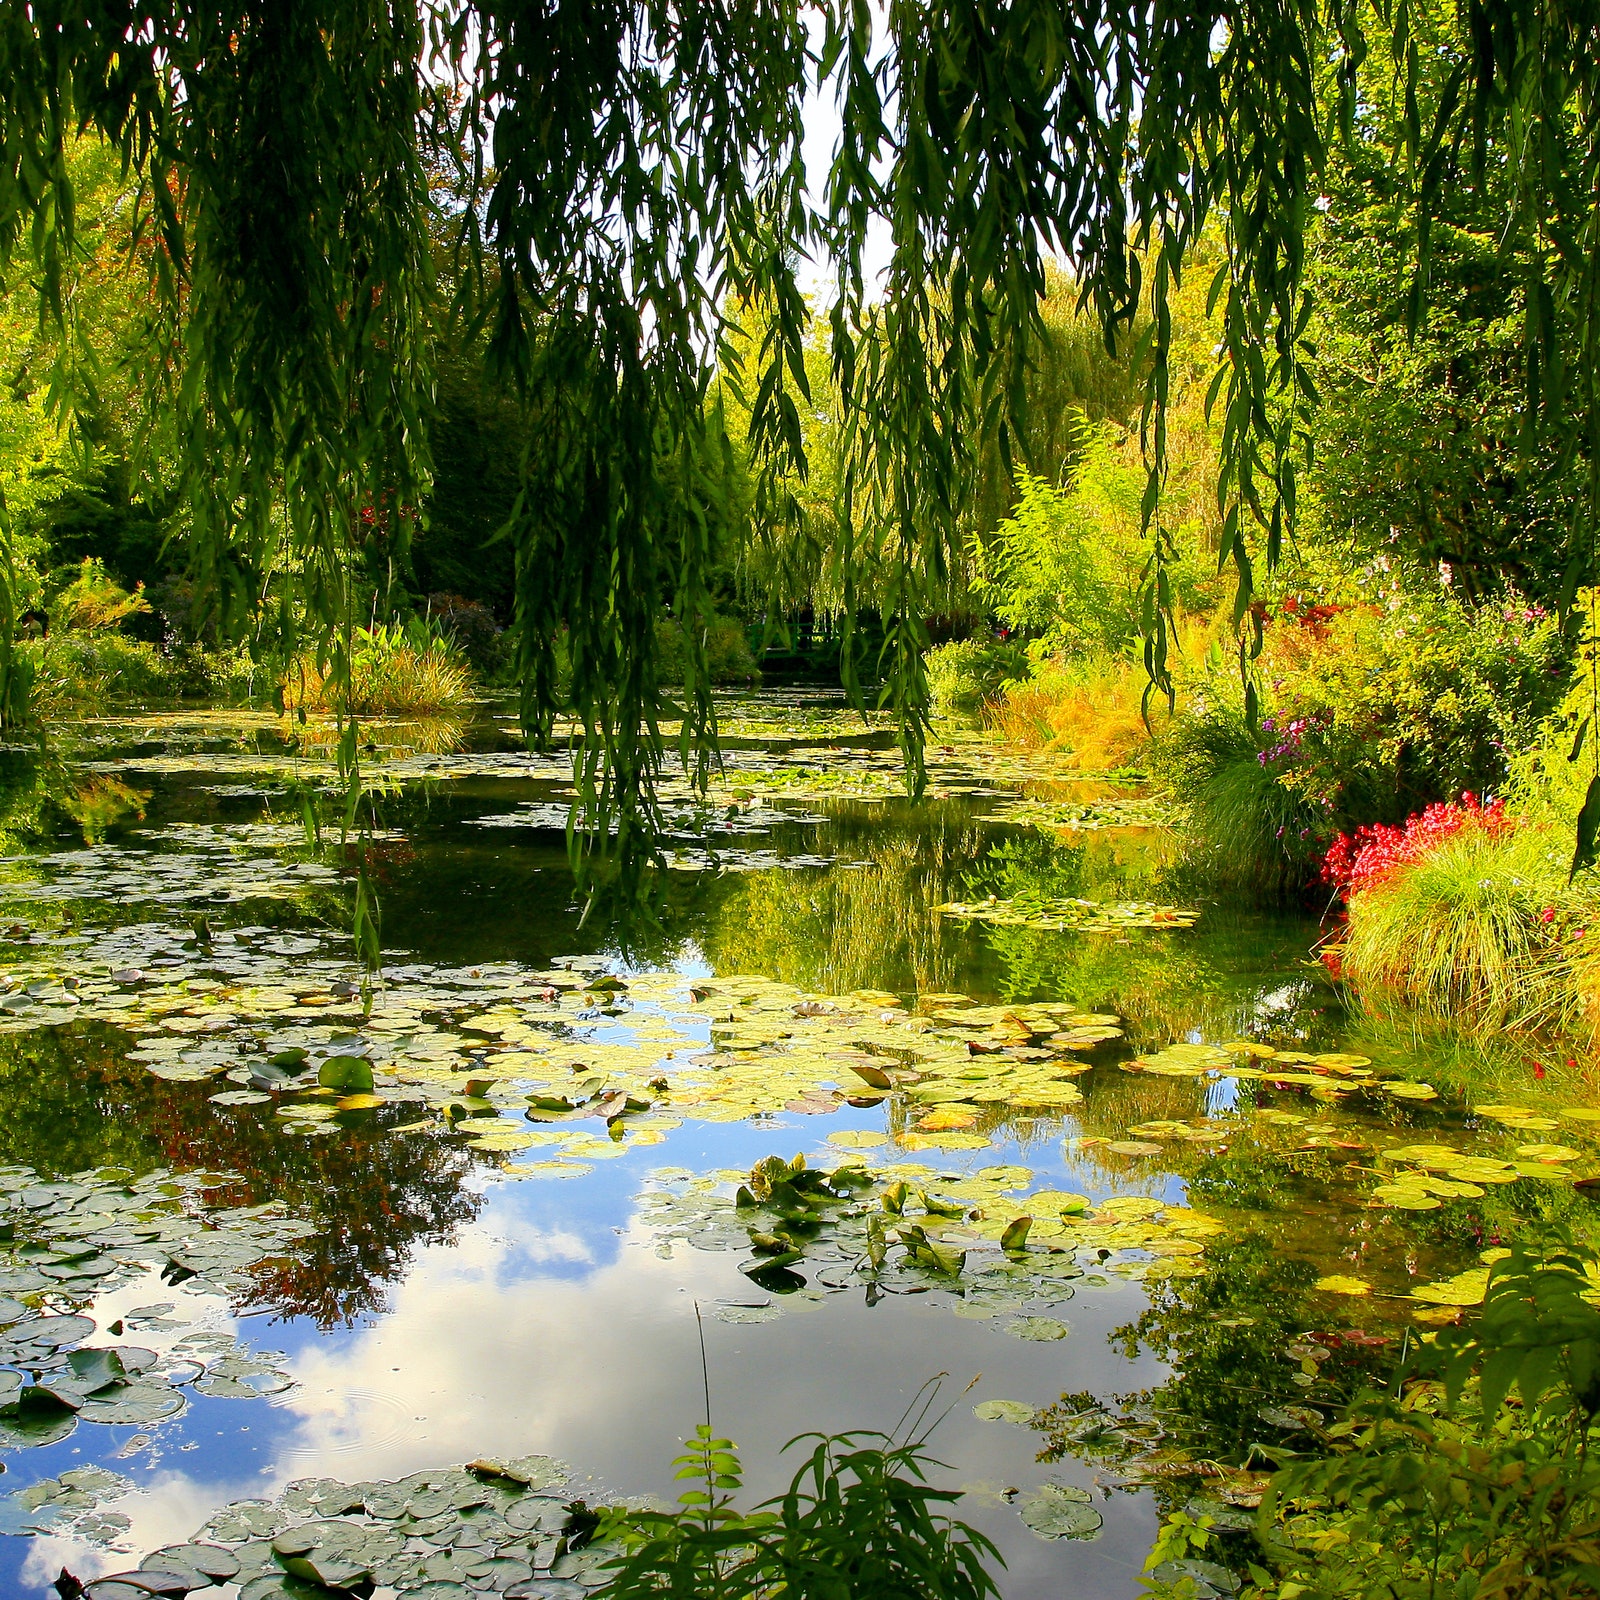 Monet's Garden in Giverny: Half-Day Audio-Guided Tour from Paris in France